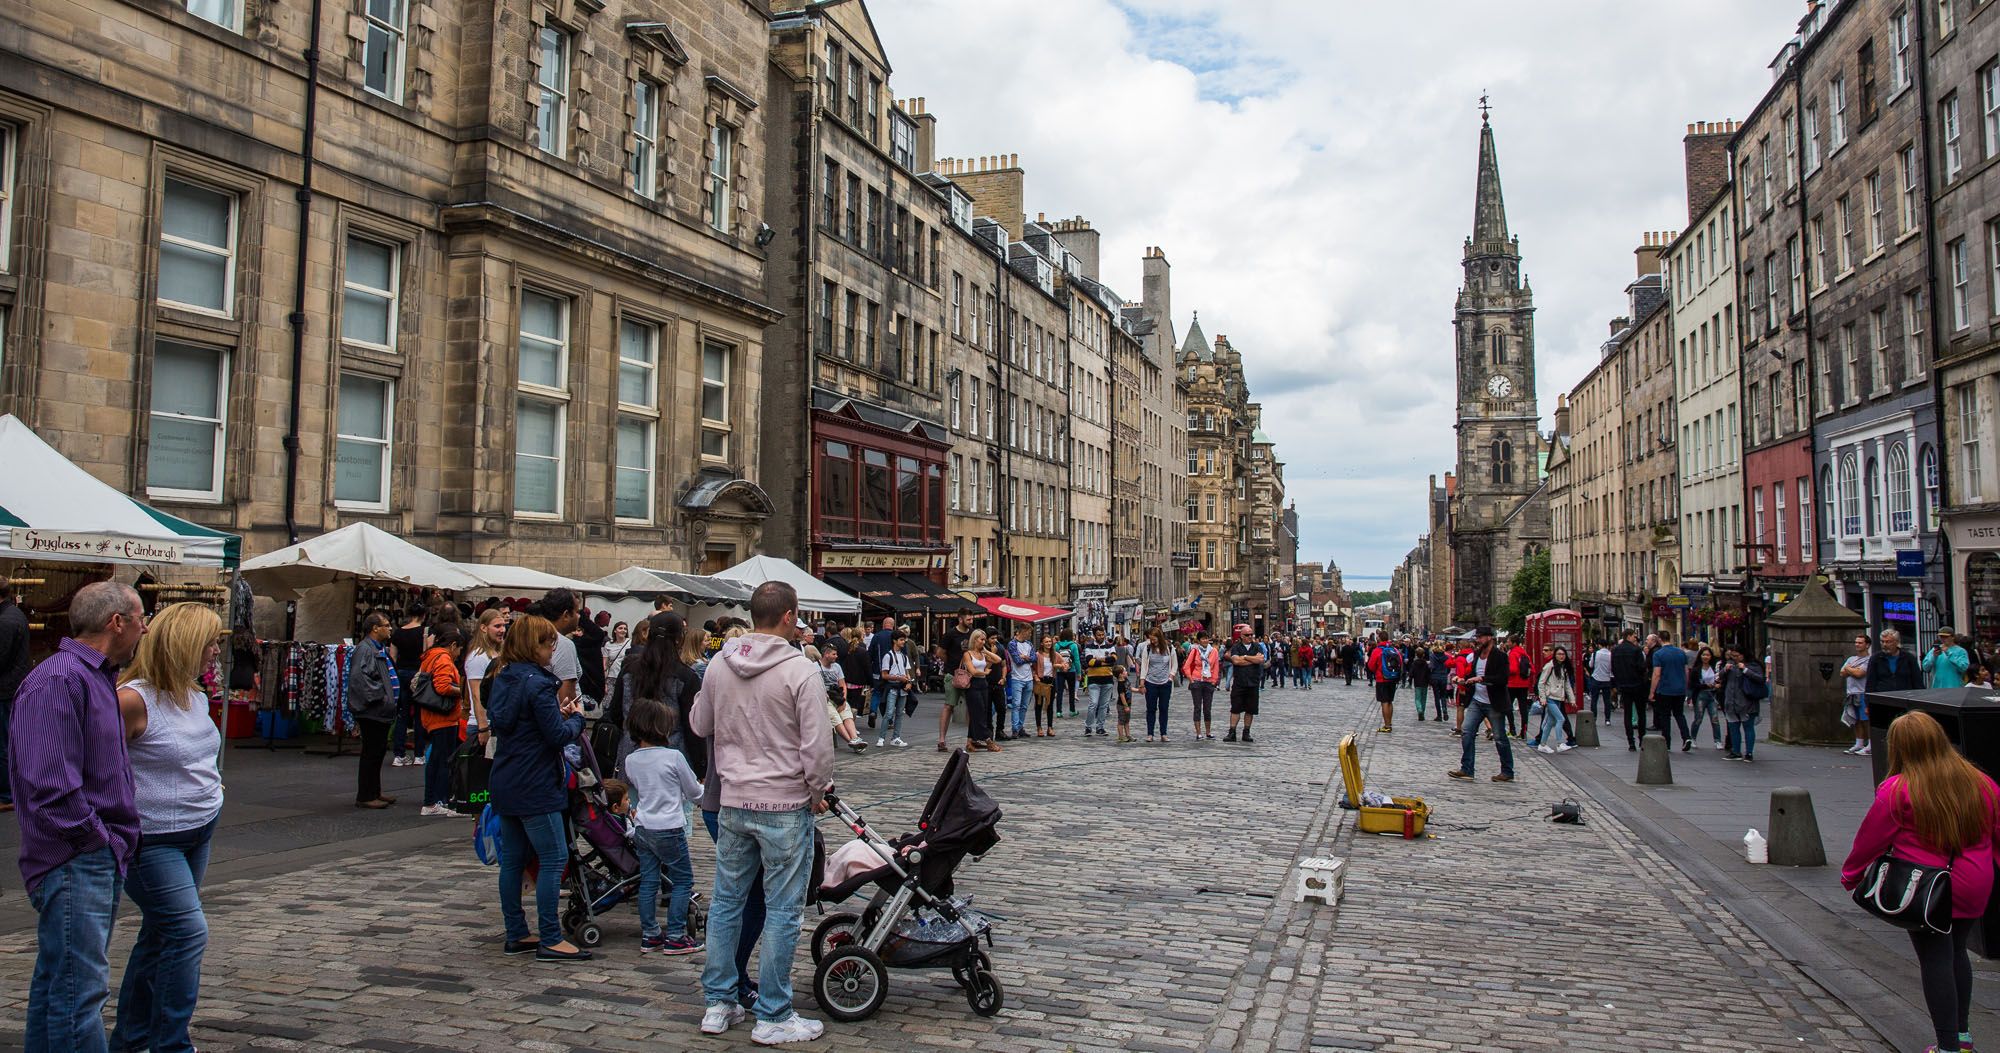 Featured image for “11 Awesome Things to do in Edinburgh with Kids”